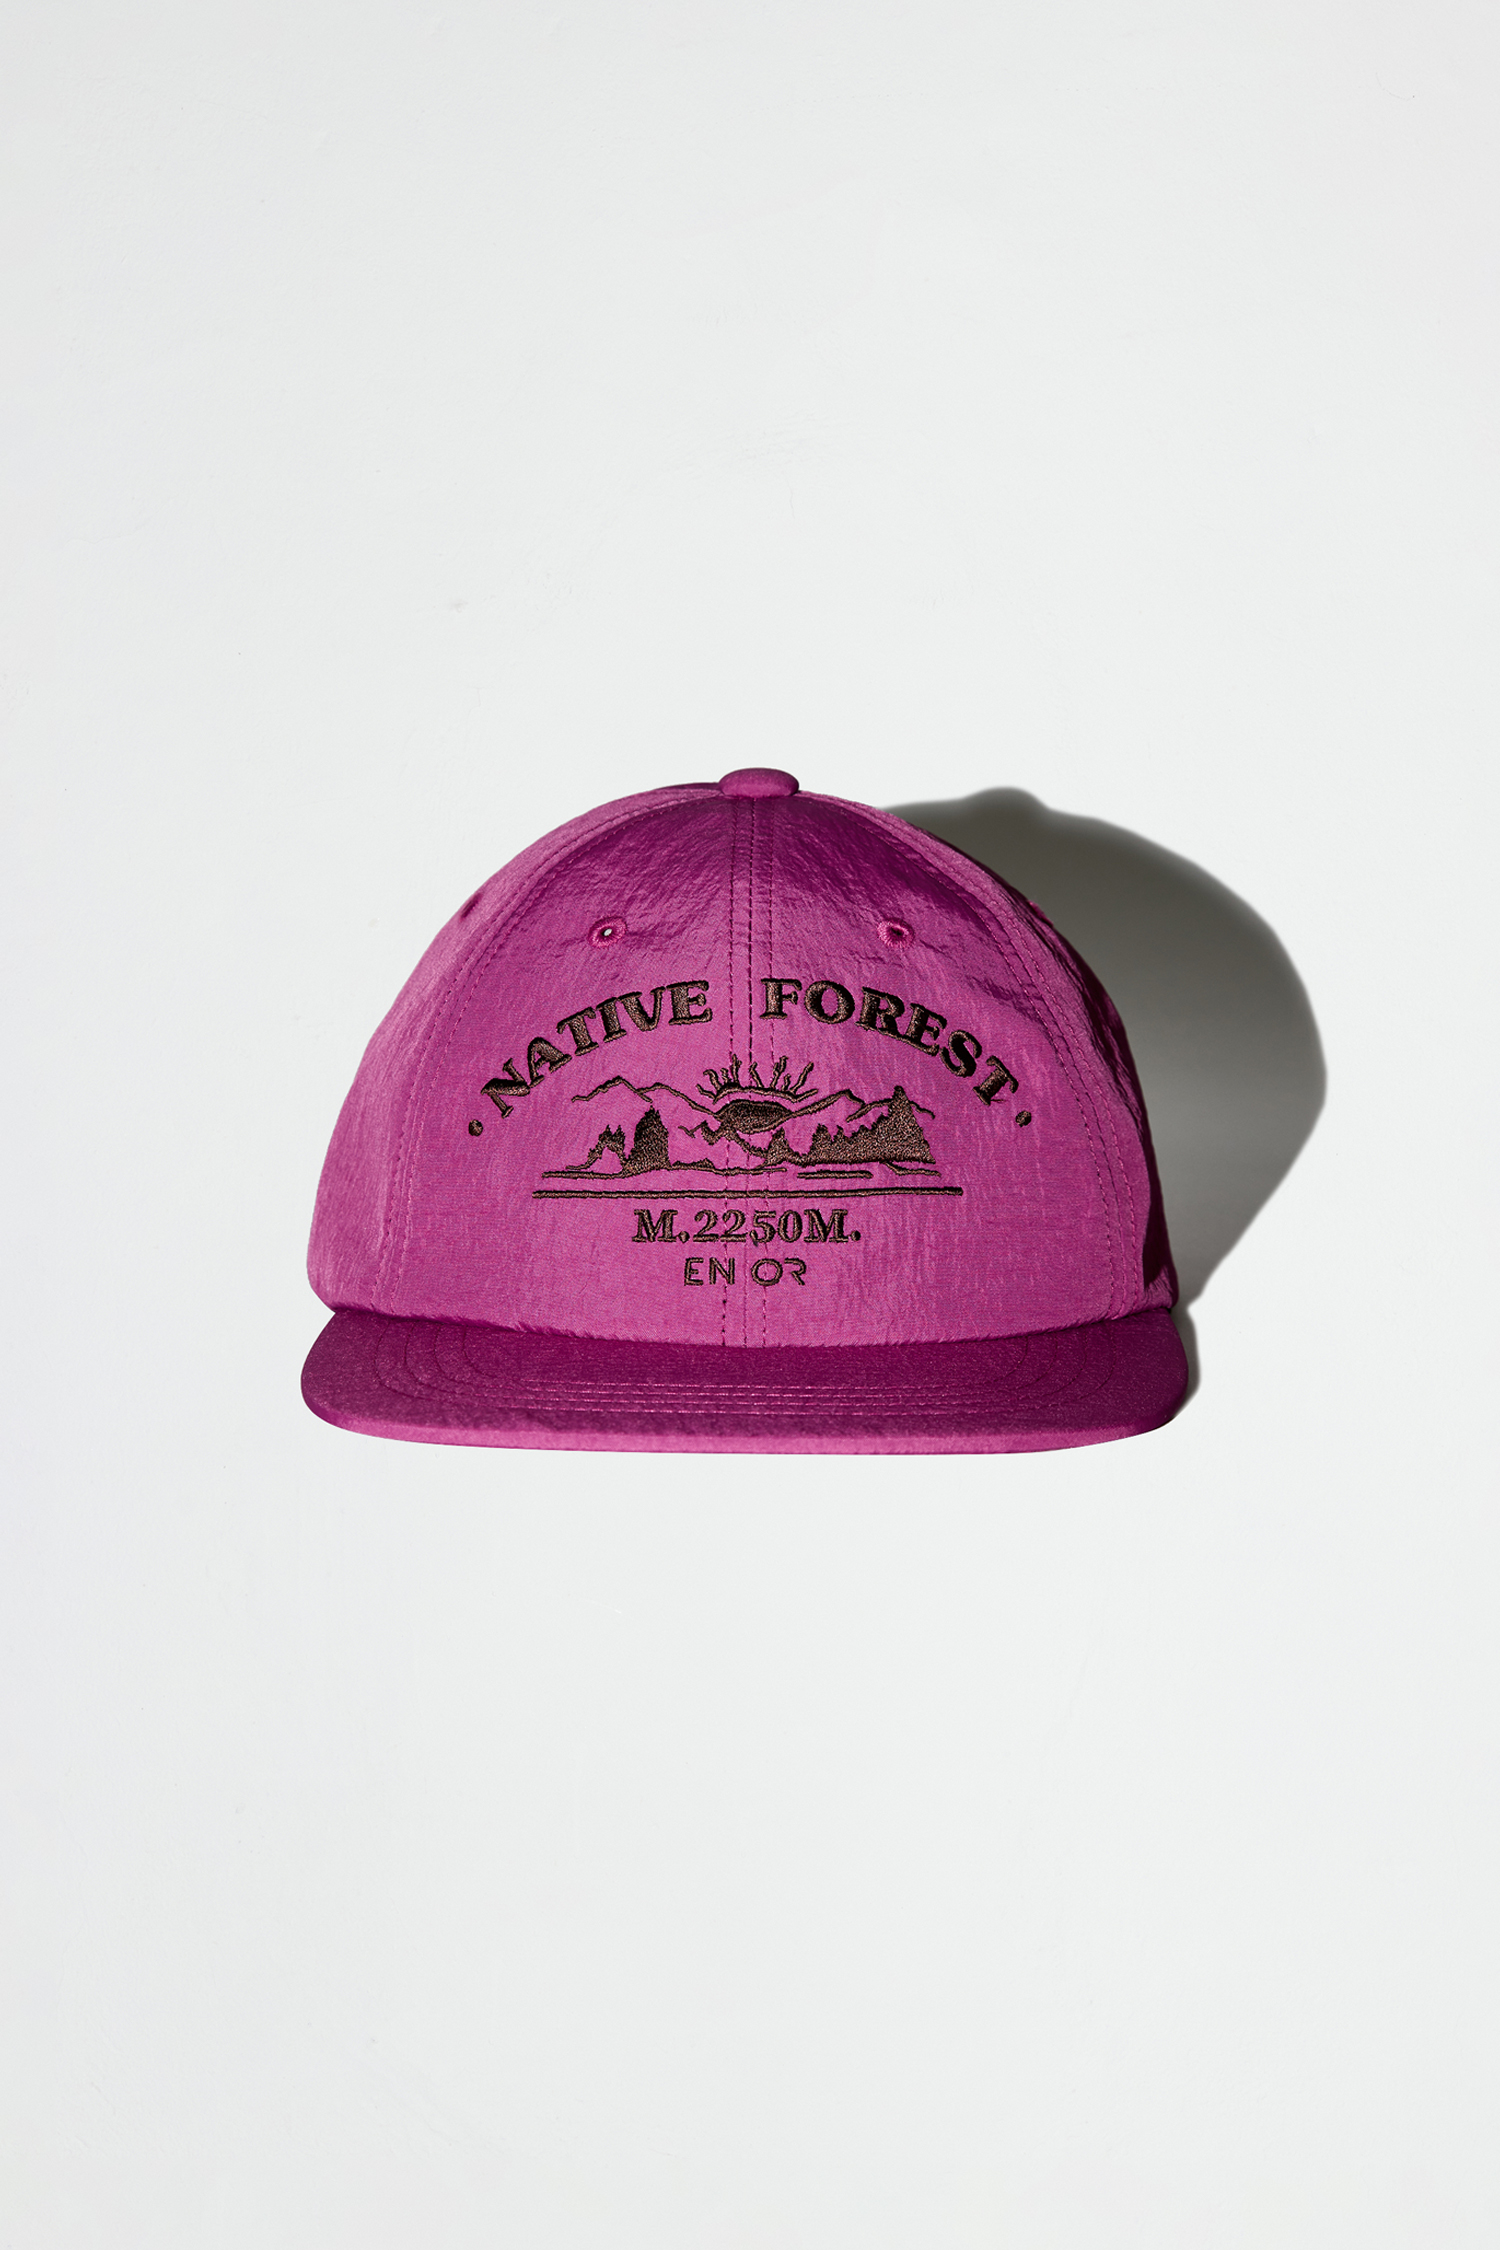 [EXCLUSIVE] NATIVE FOREST ENOR NYLON BALL CAP - NAVY, PINK